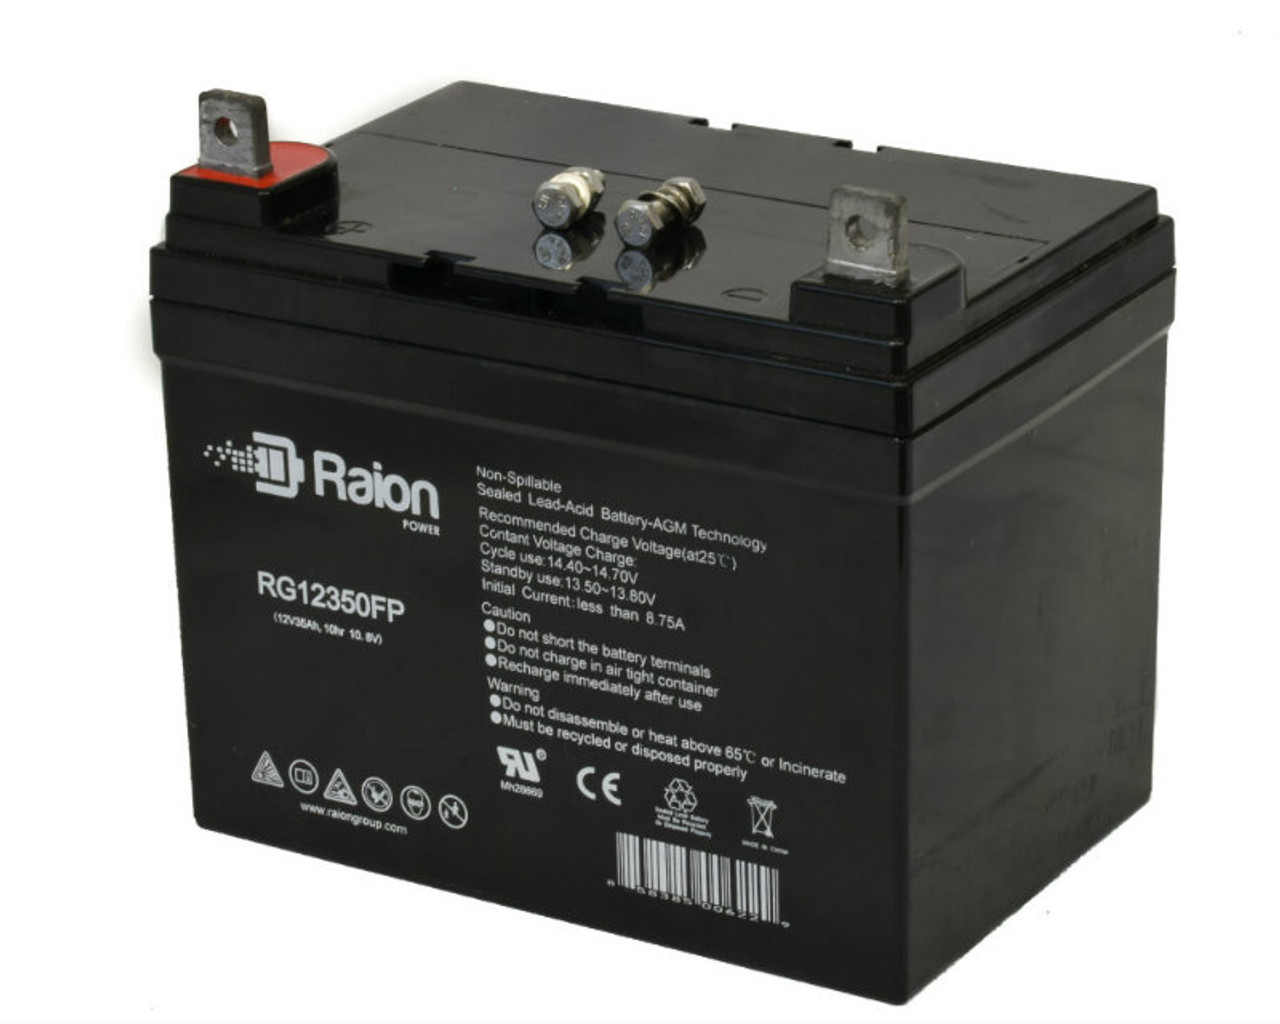 Raion Power Replacement 12V 35Ah RG12350FP Mobility Scooter Battery for Golden Technologies GT Alero 18 Folding